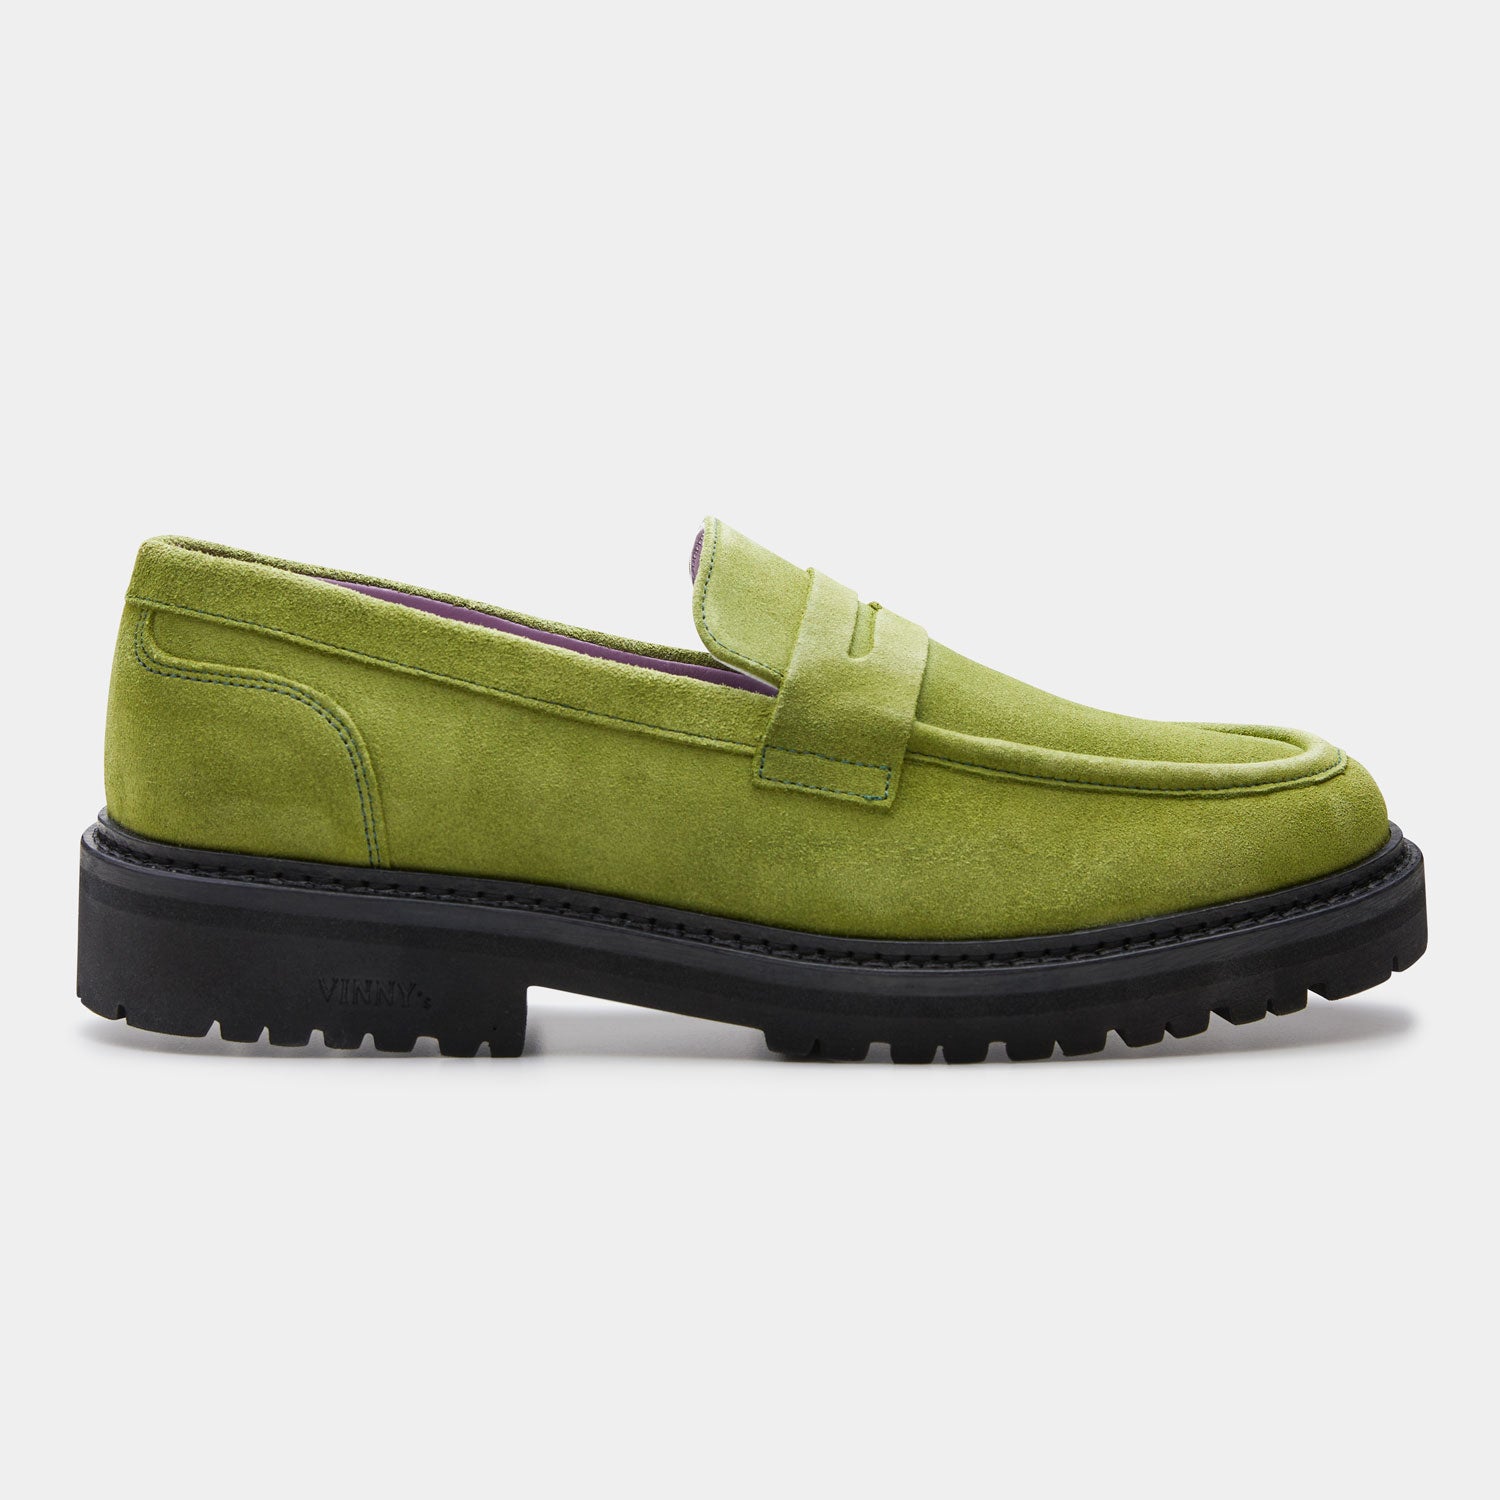 richee penny loafer in green